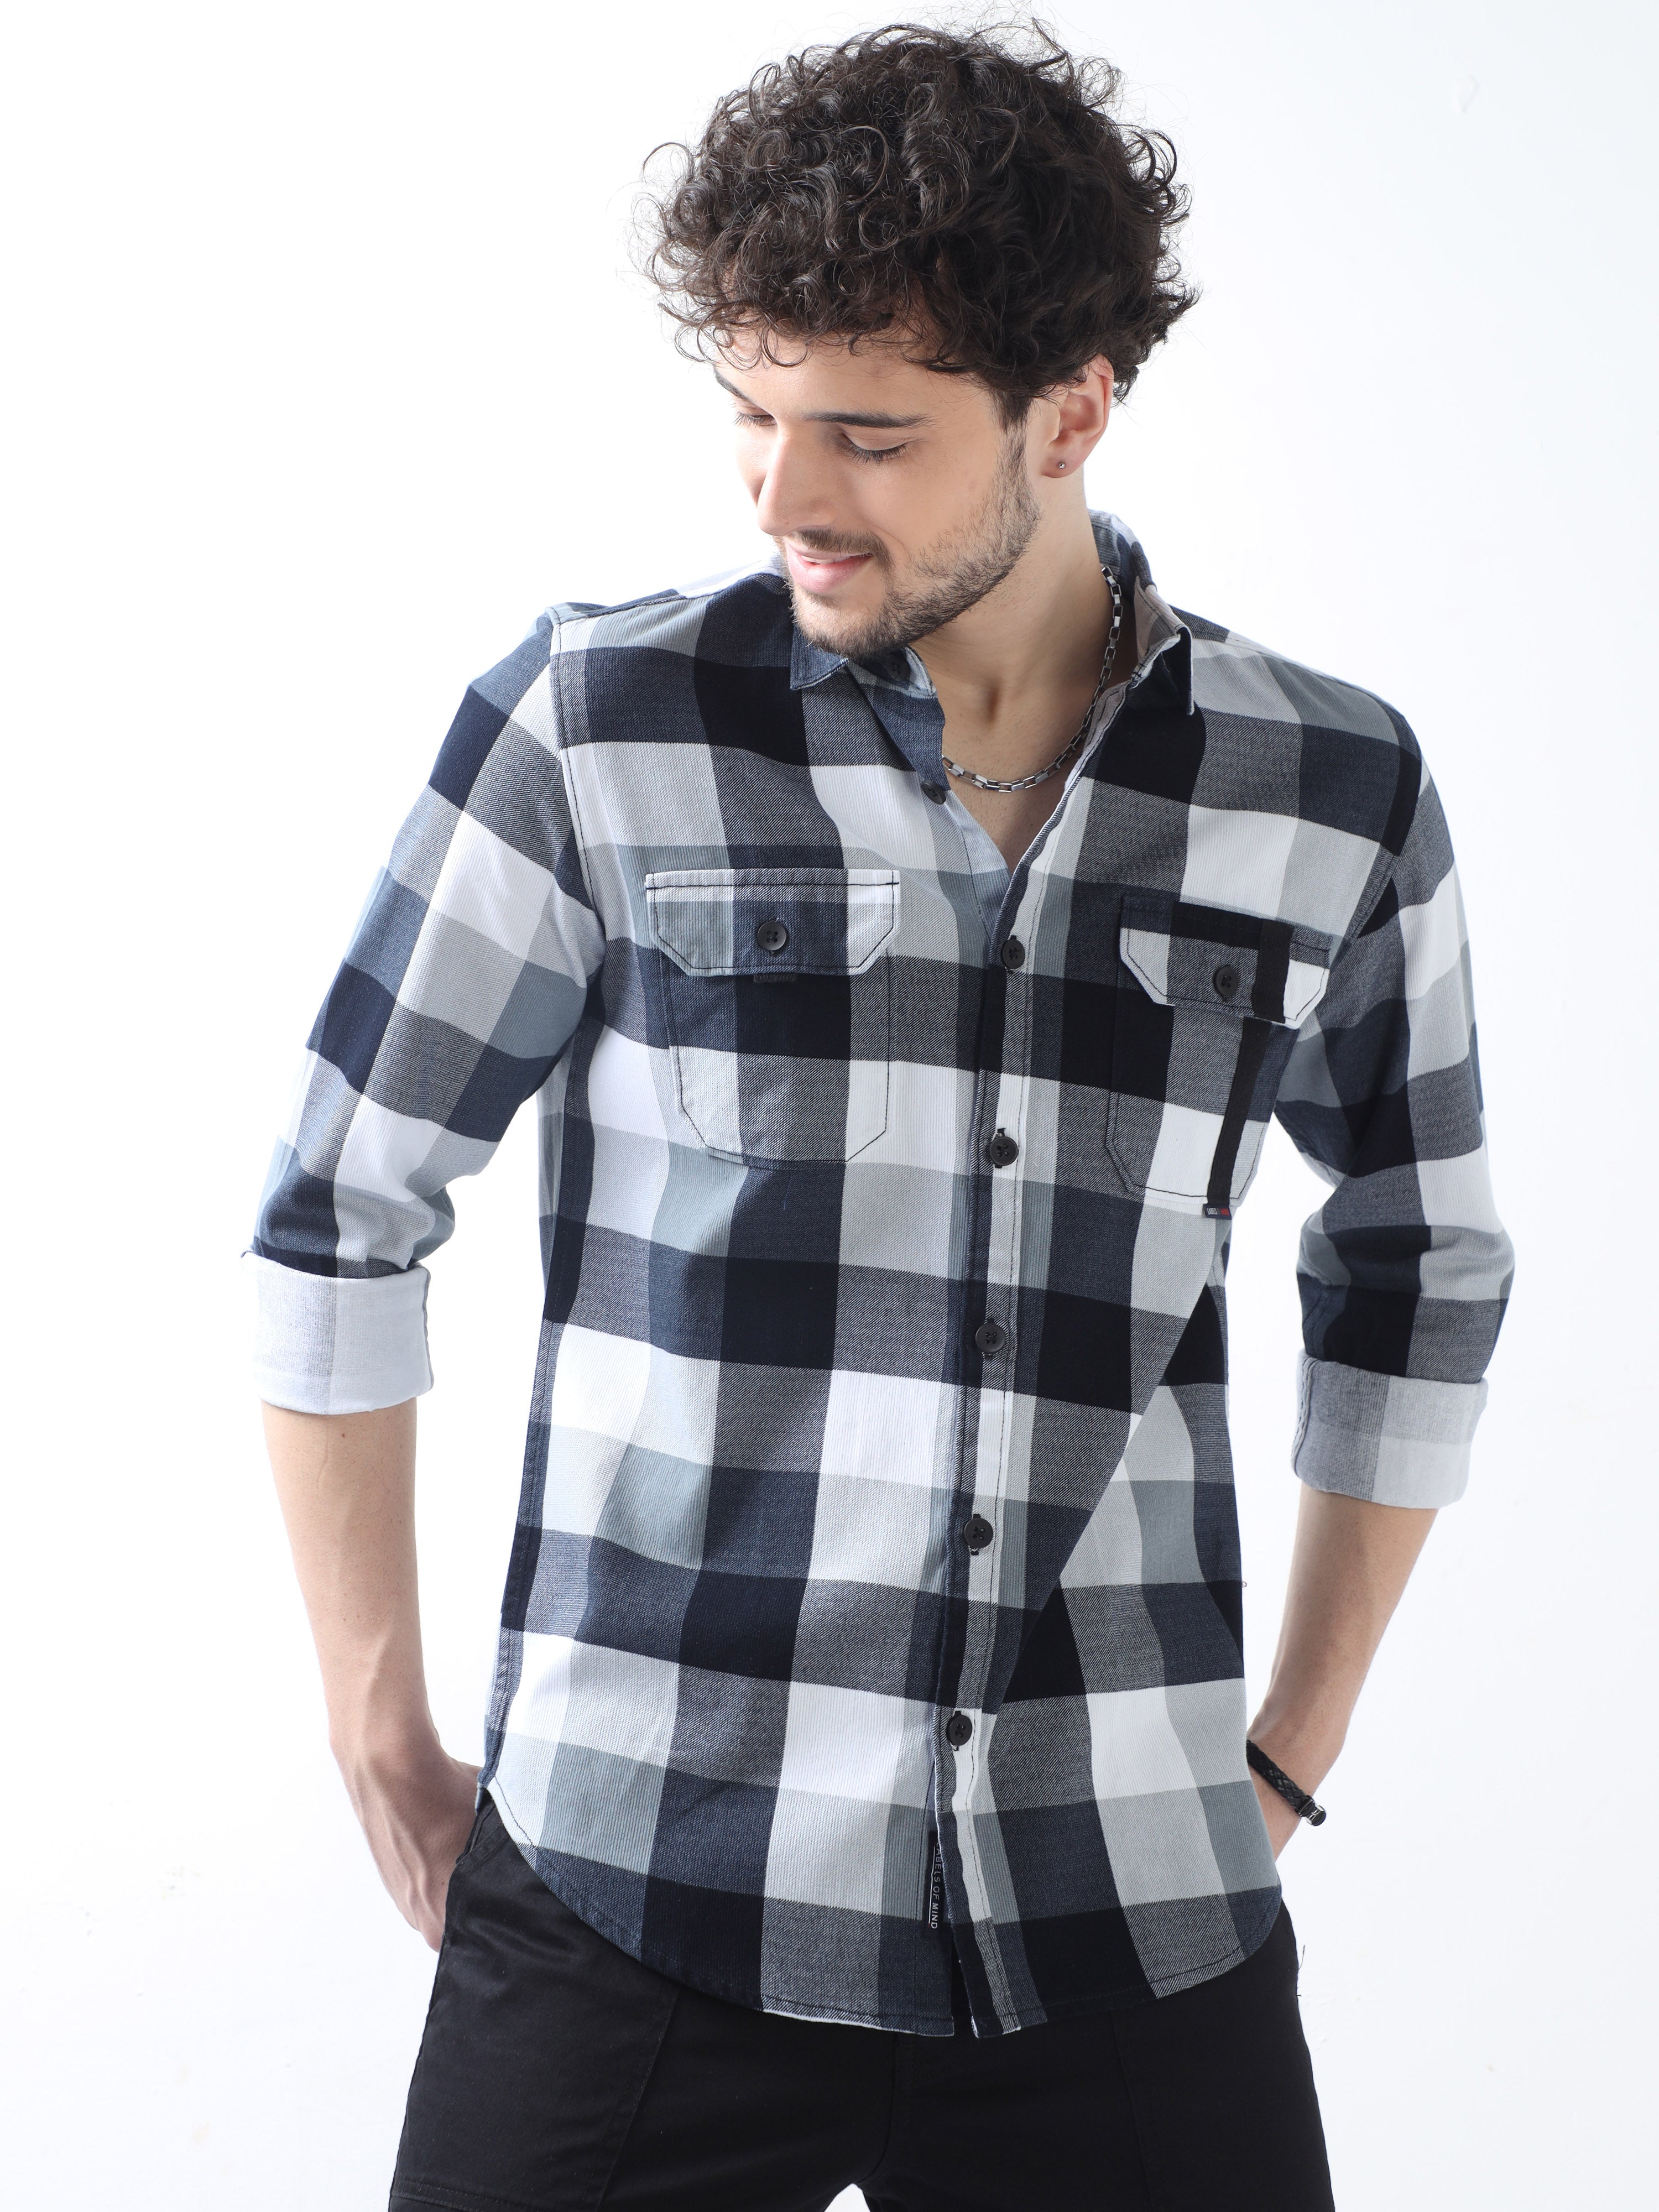 Buy cool and comfortable blue check shirt Online in IndiaRs. 1359.00